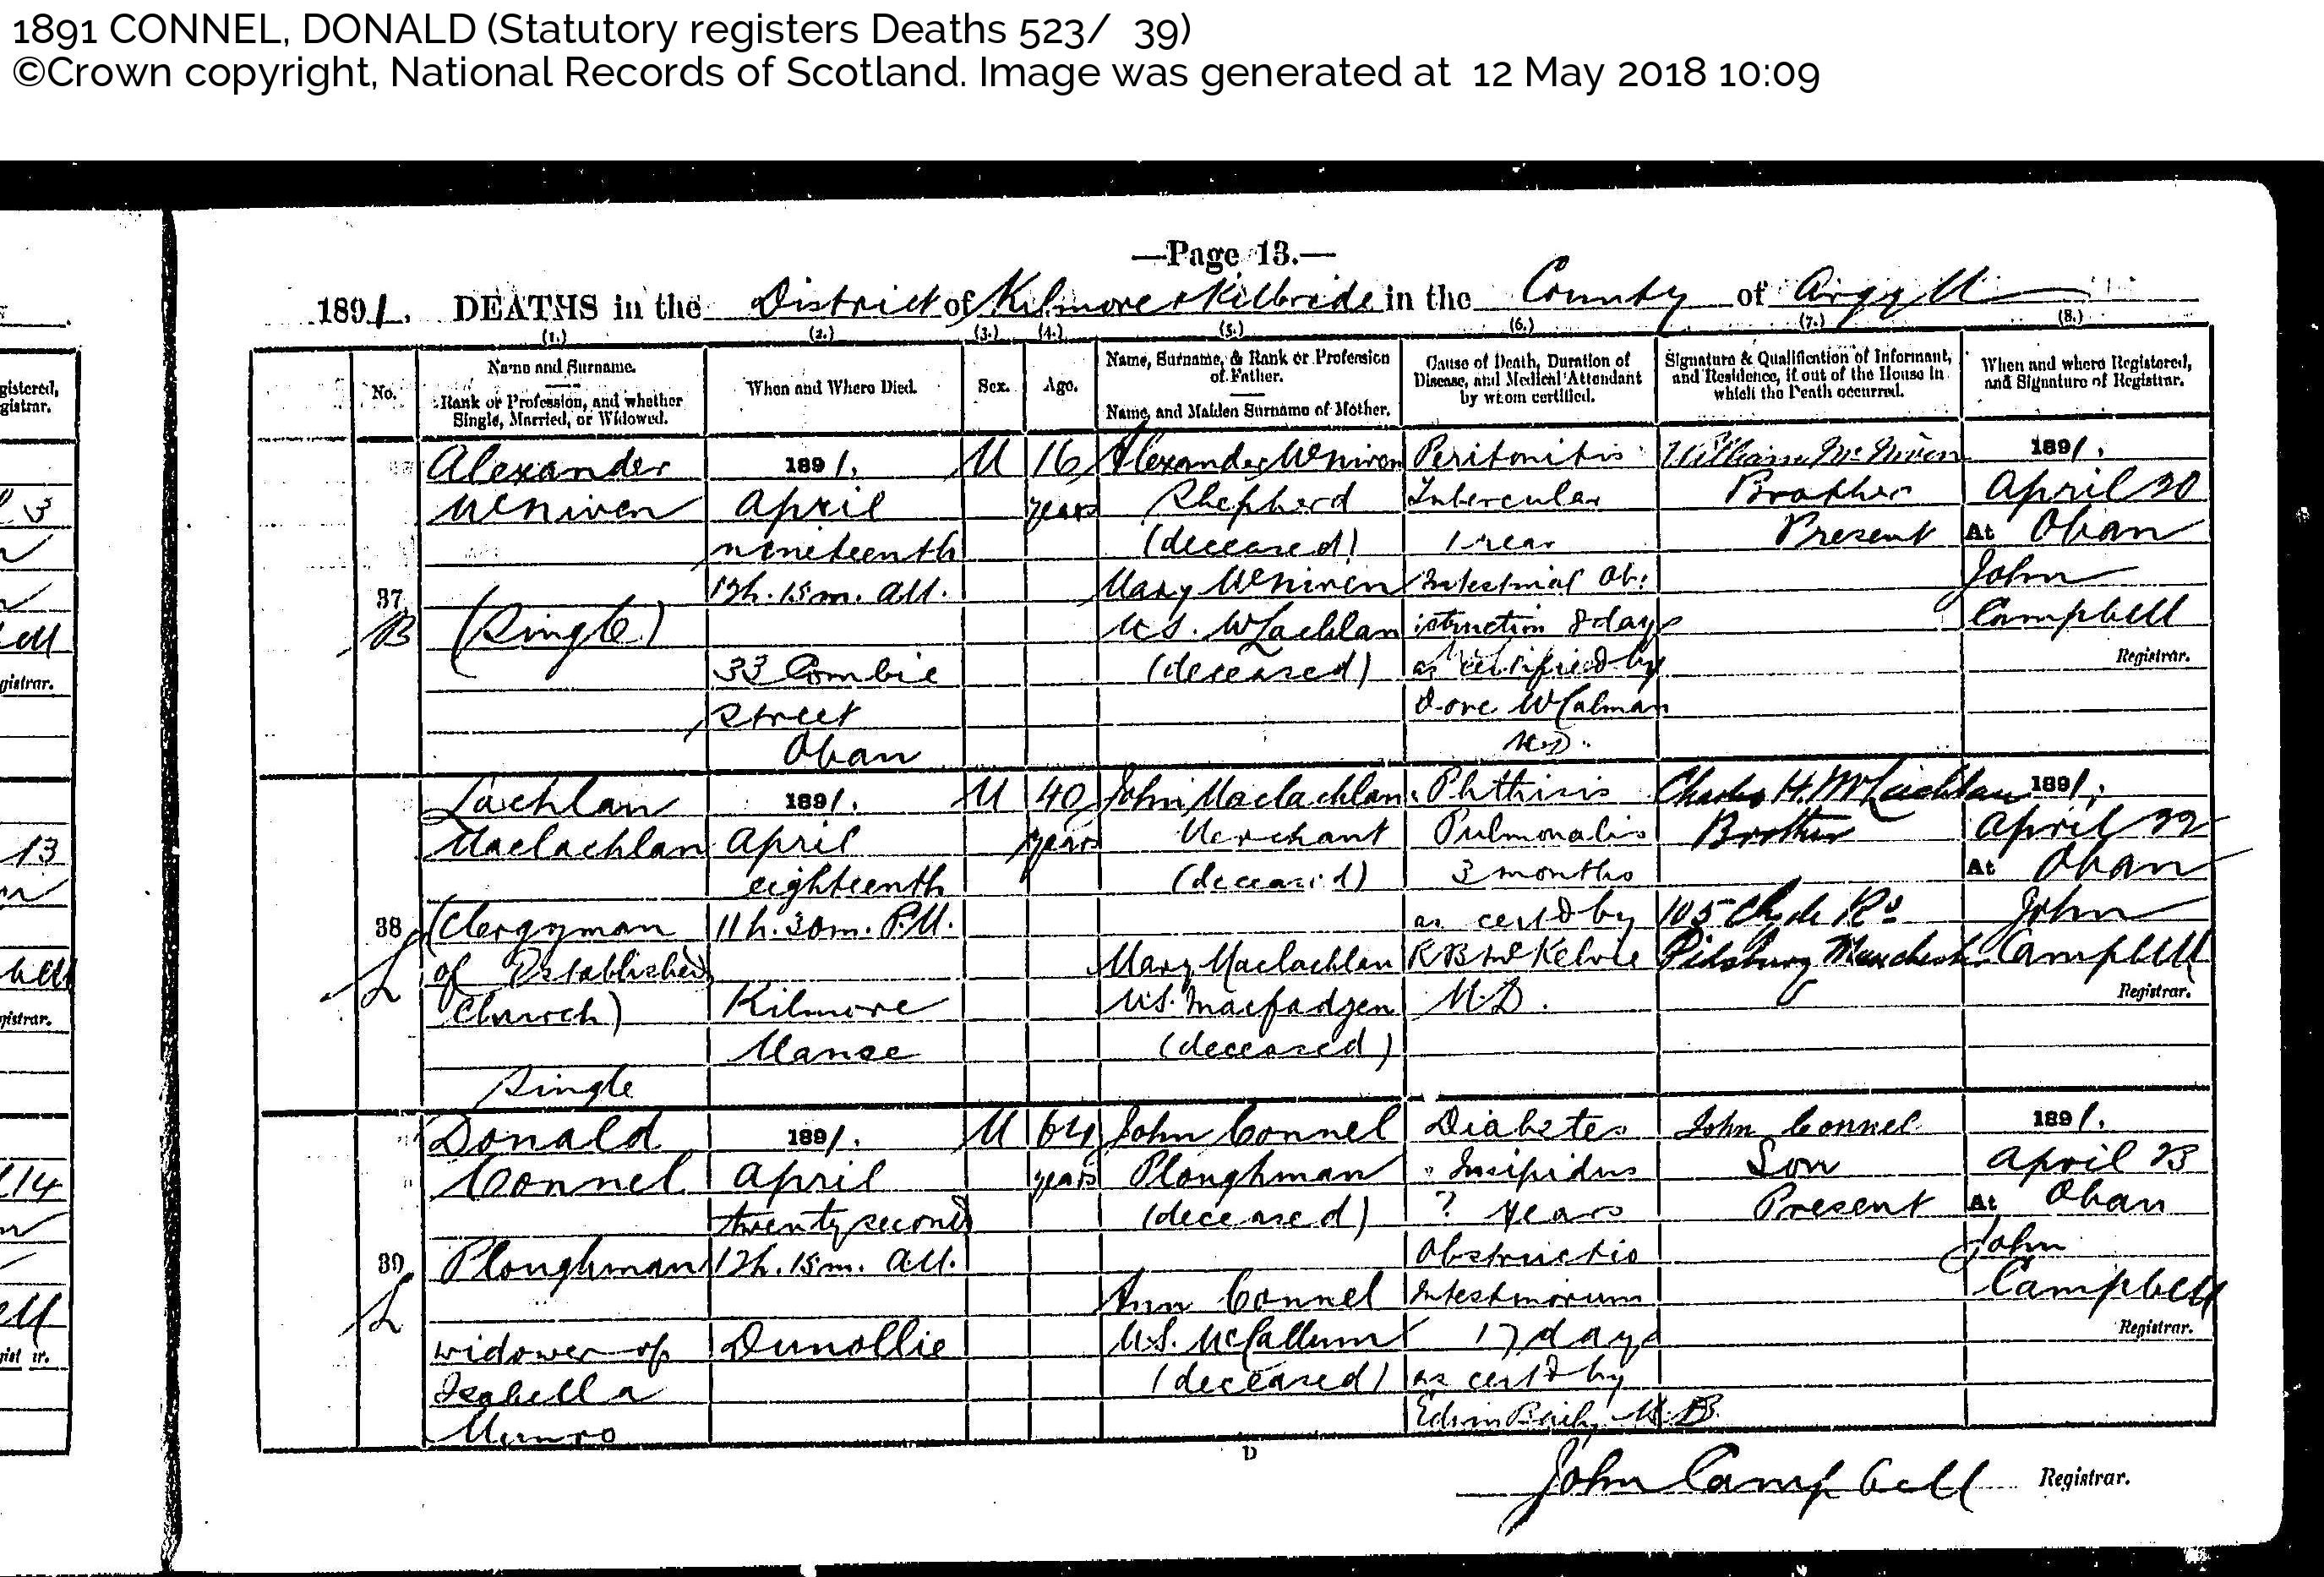 DonaldConnel_D1891, April 22, 1891, Linked To: <a href='i2561.html' >Ann McCallum</a>